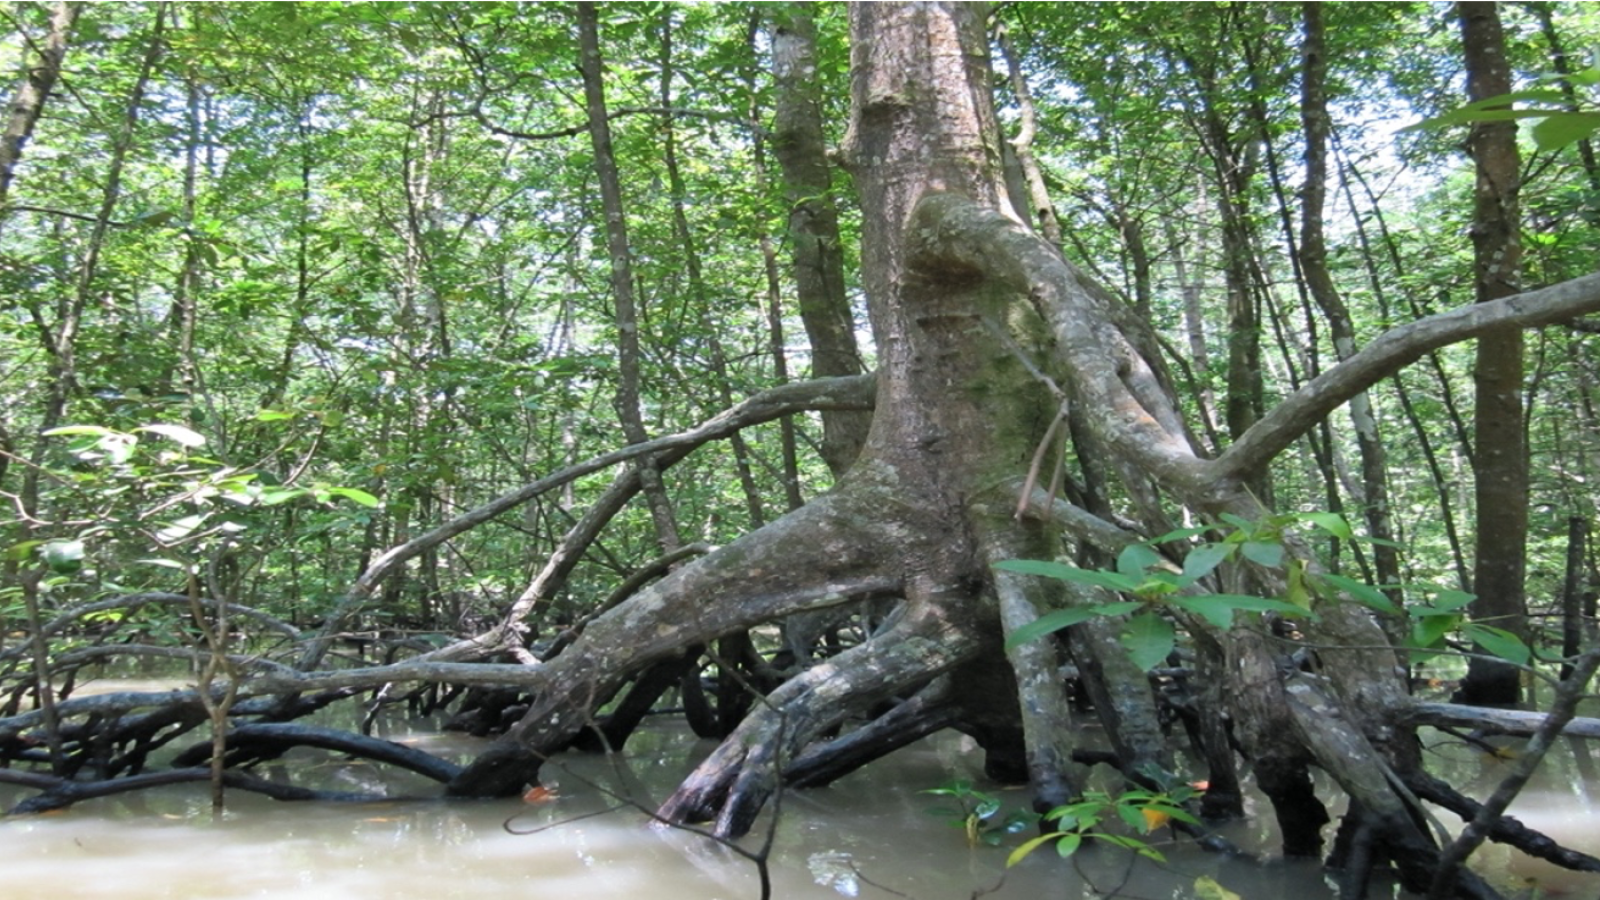 Mangroves, an iconic coastal forest found across the tropics, such as in Johor, Malaysia.